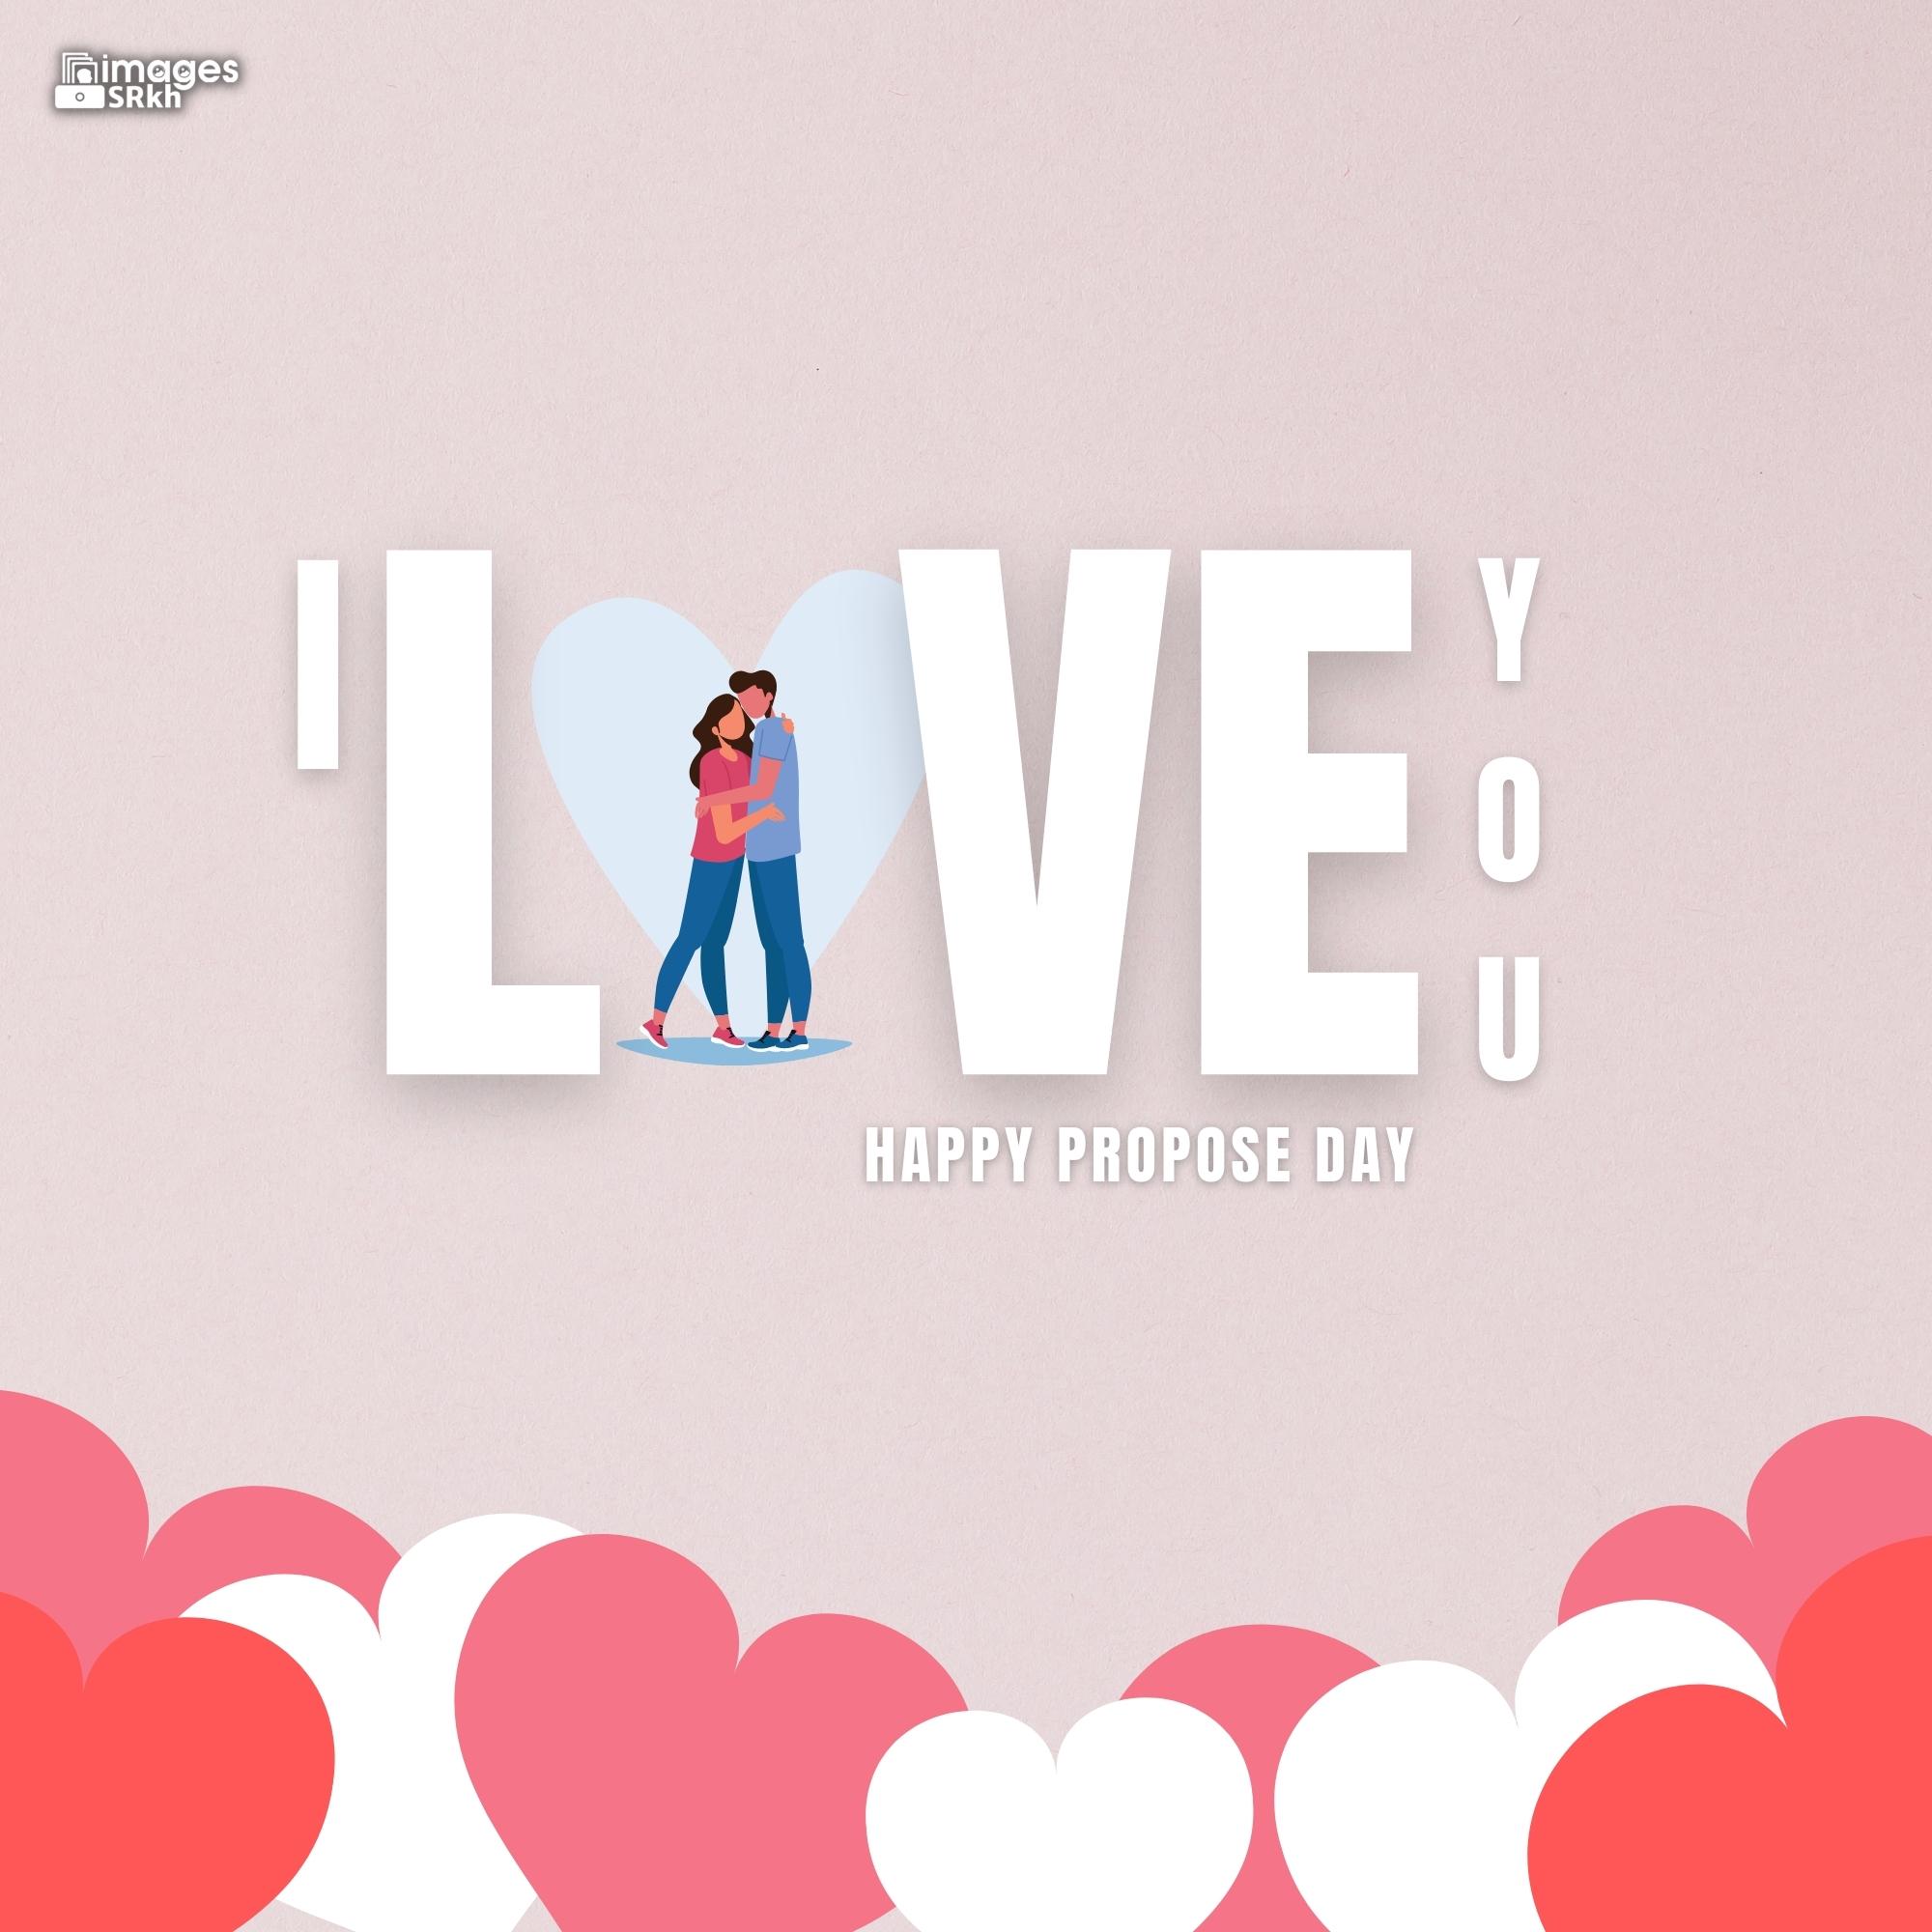 Happy Propose Day Images | 411 | I LOVE YOU